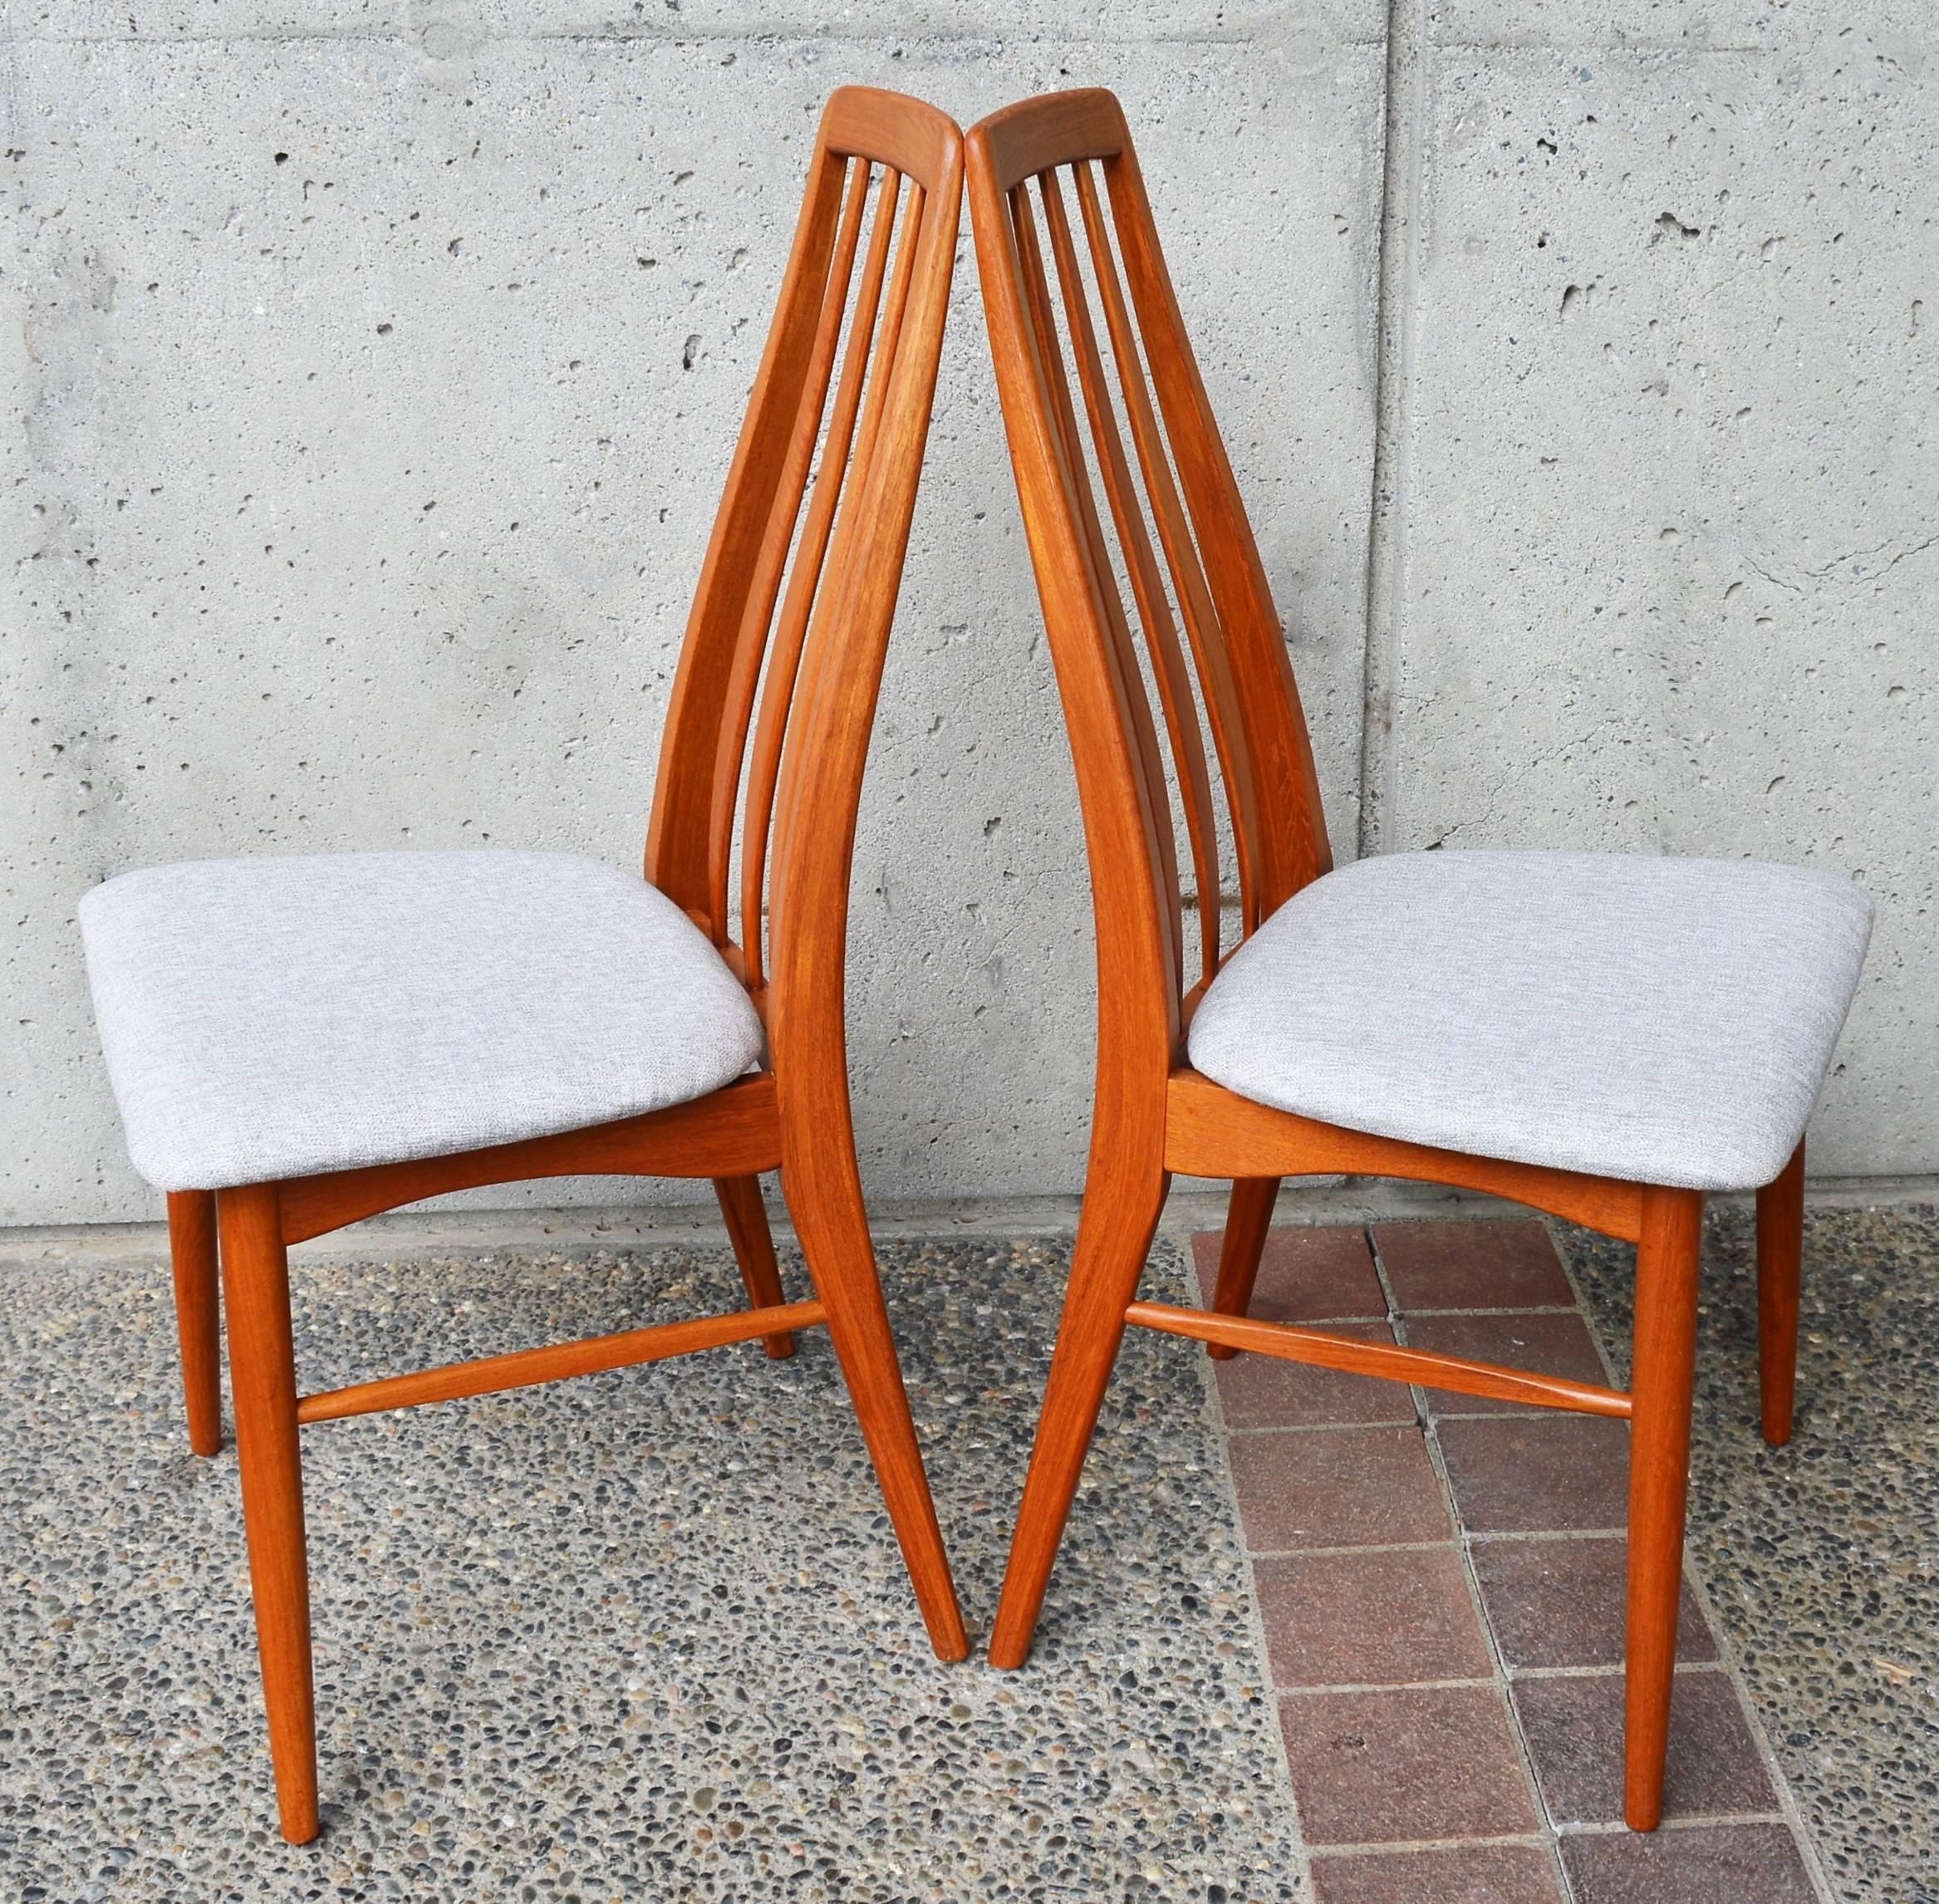 This gorgeous set of 6 Koefoeds Hornslet teak Eva chairs are known for their comfort, due to the ergonomic contoured lumbar support. Designed in the 1960s by Niels Koefoed. Their backs taper towards the top and the three back slats diamond at their